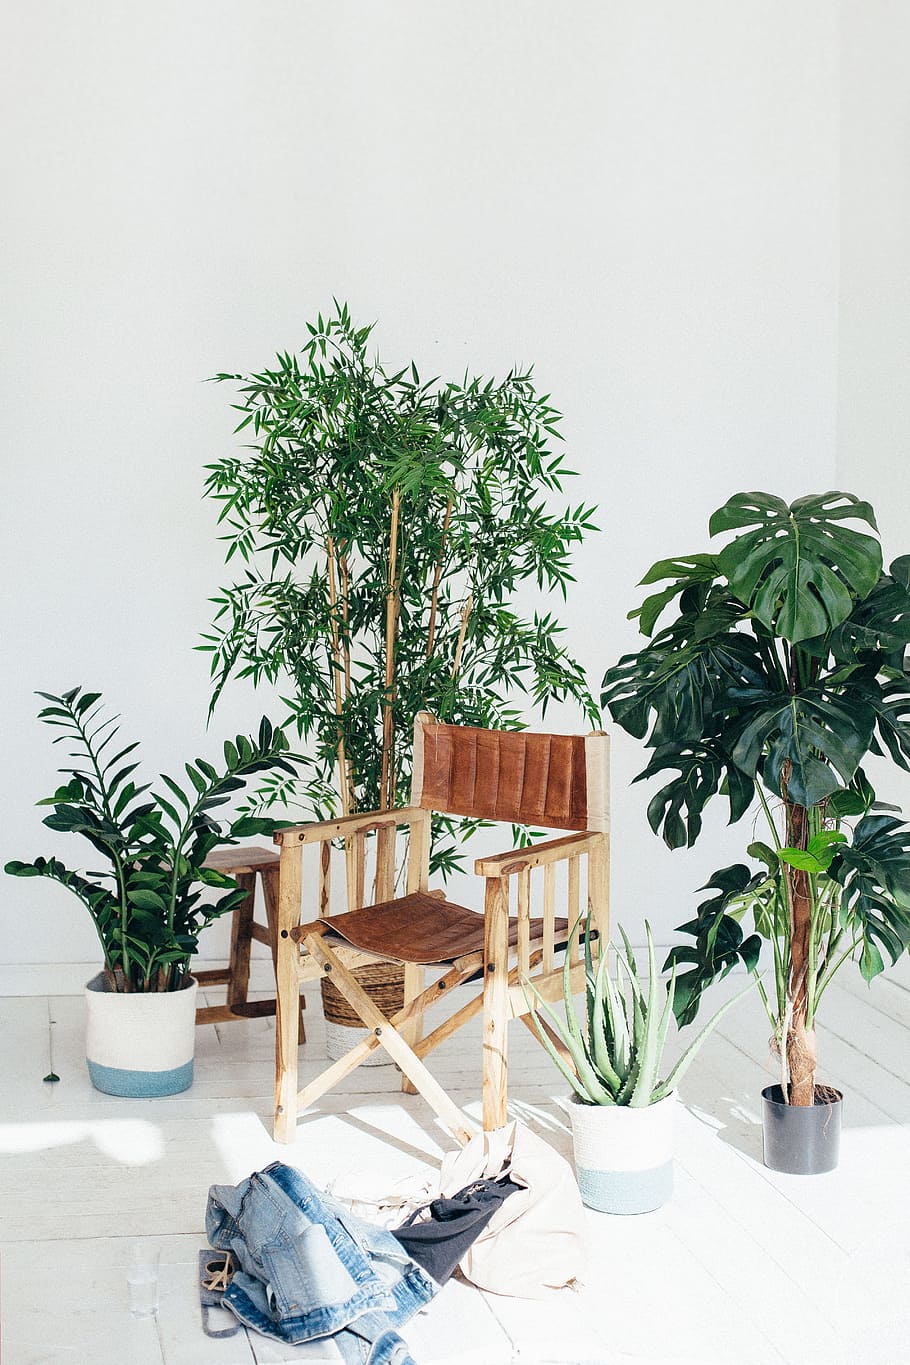 director, chair, plants, inside, internal, house plant, clothes, minimal, white, pot